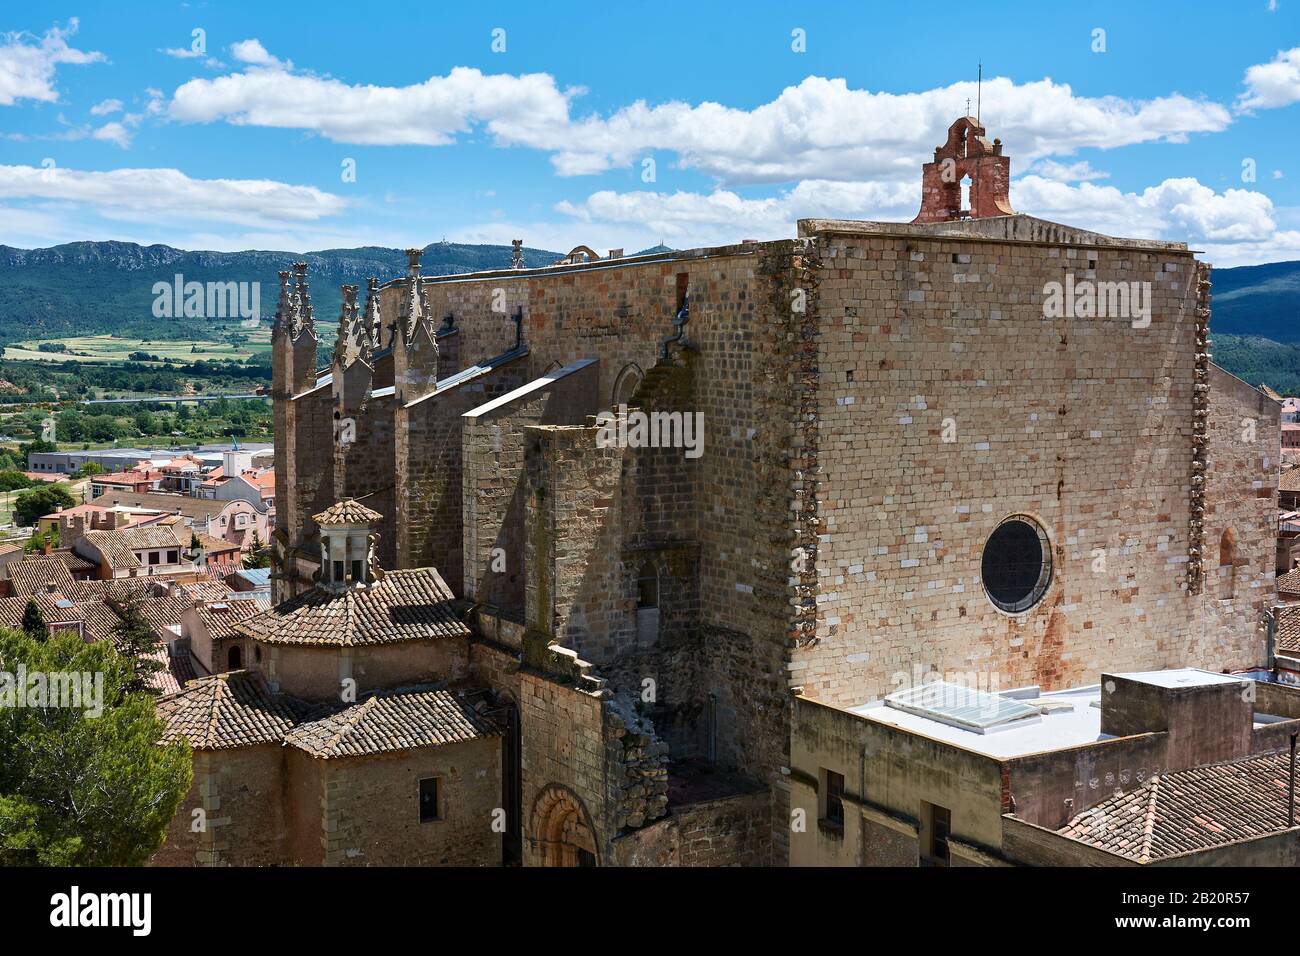 View of the gothic church of Saint Mary in the medieval village of Montblanc, province of Tarragona, Spain. Amazing landscape of mountains behind. Stock Photo